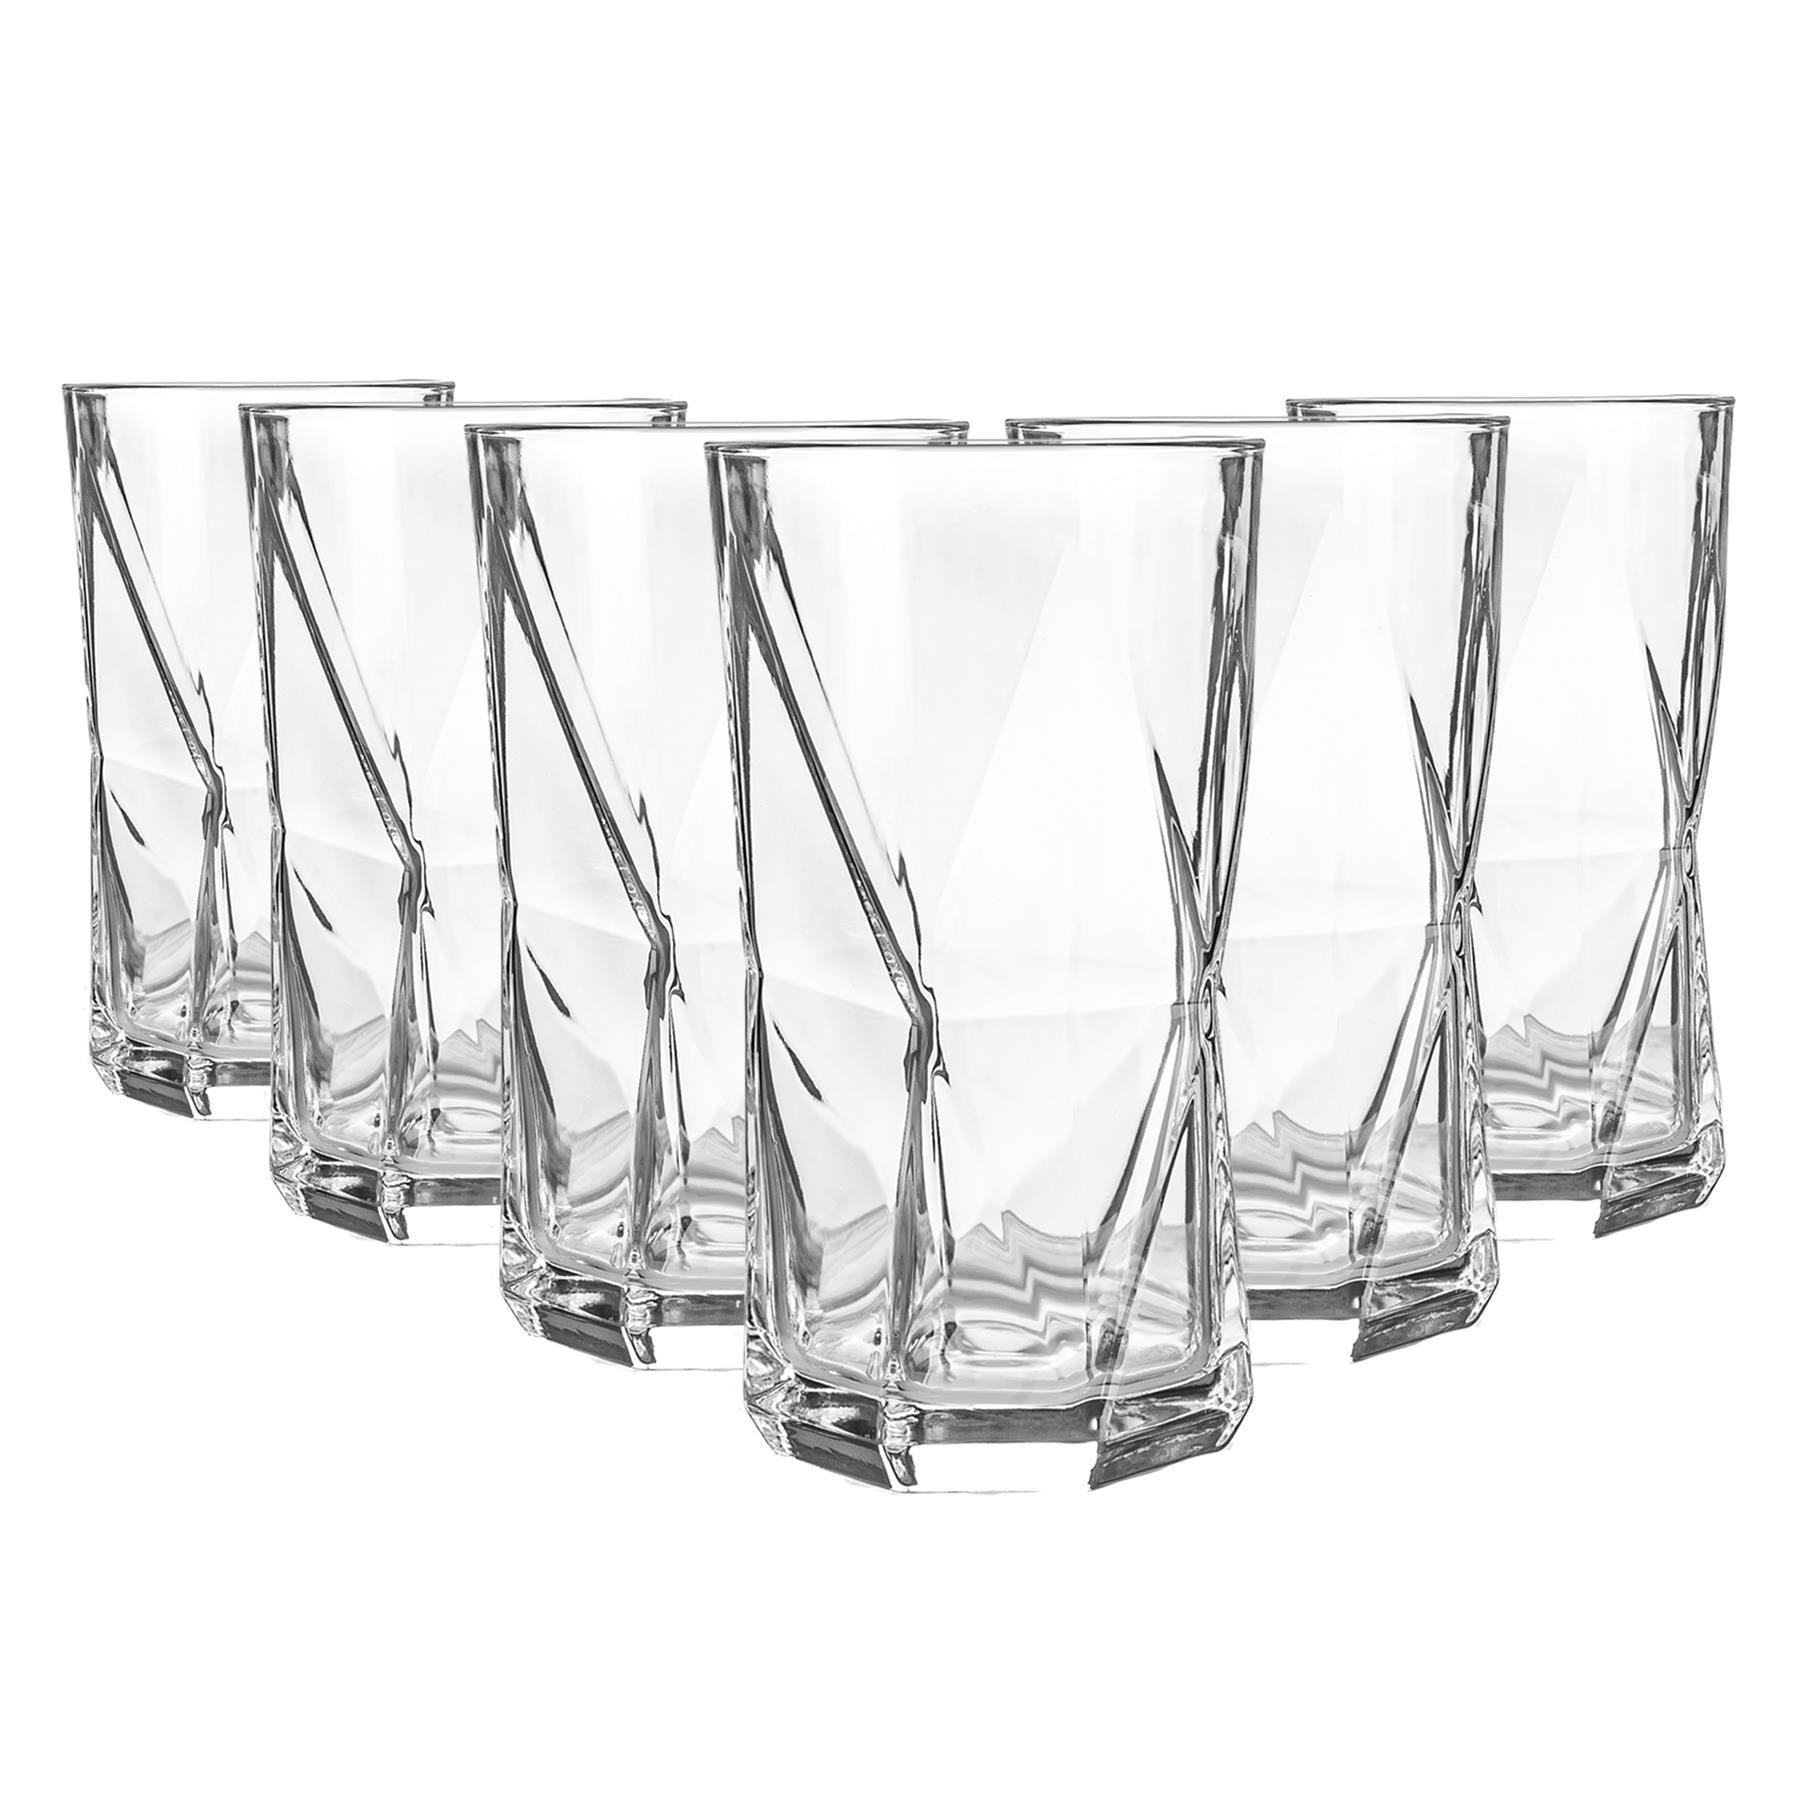 Photos - Glass Bormioli Rocco Cassiopea Highball Glasses - 480ml - Clear - Pack of 24 